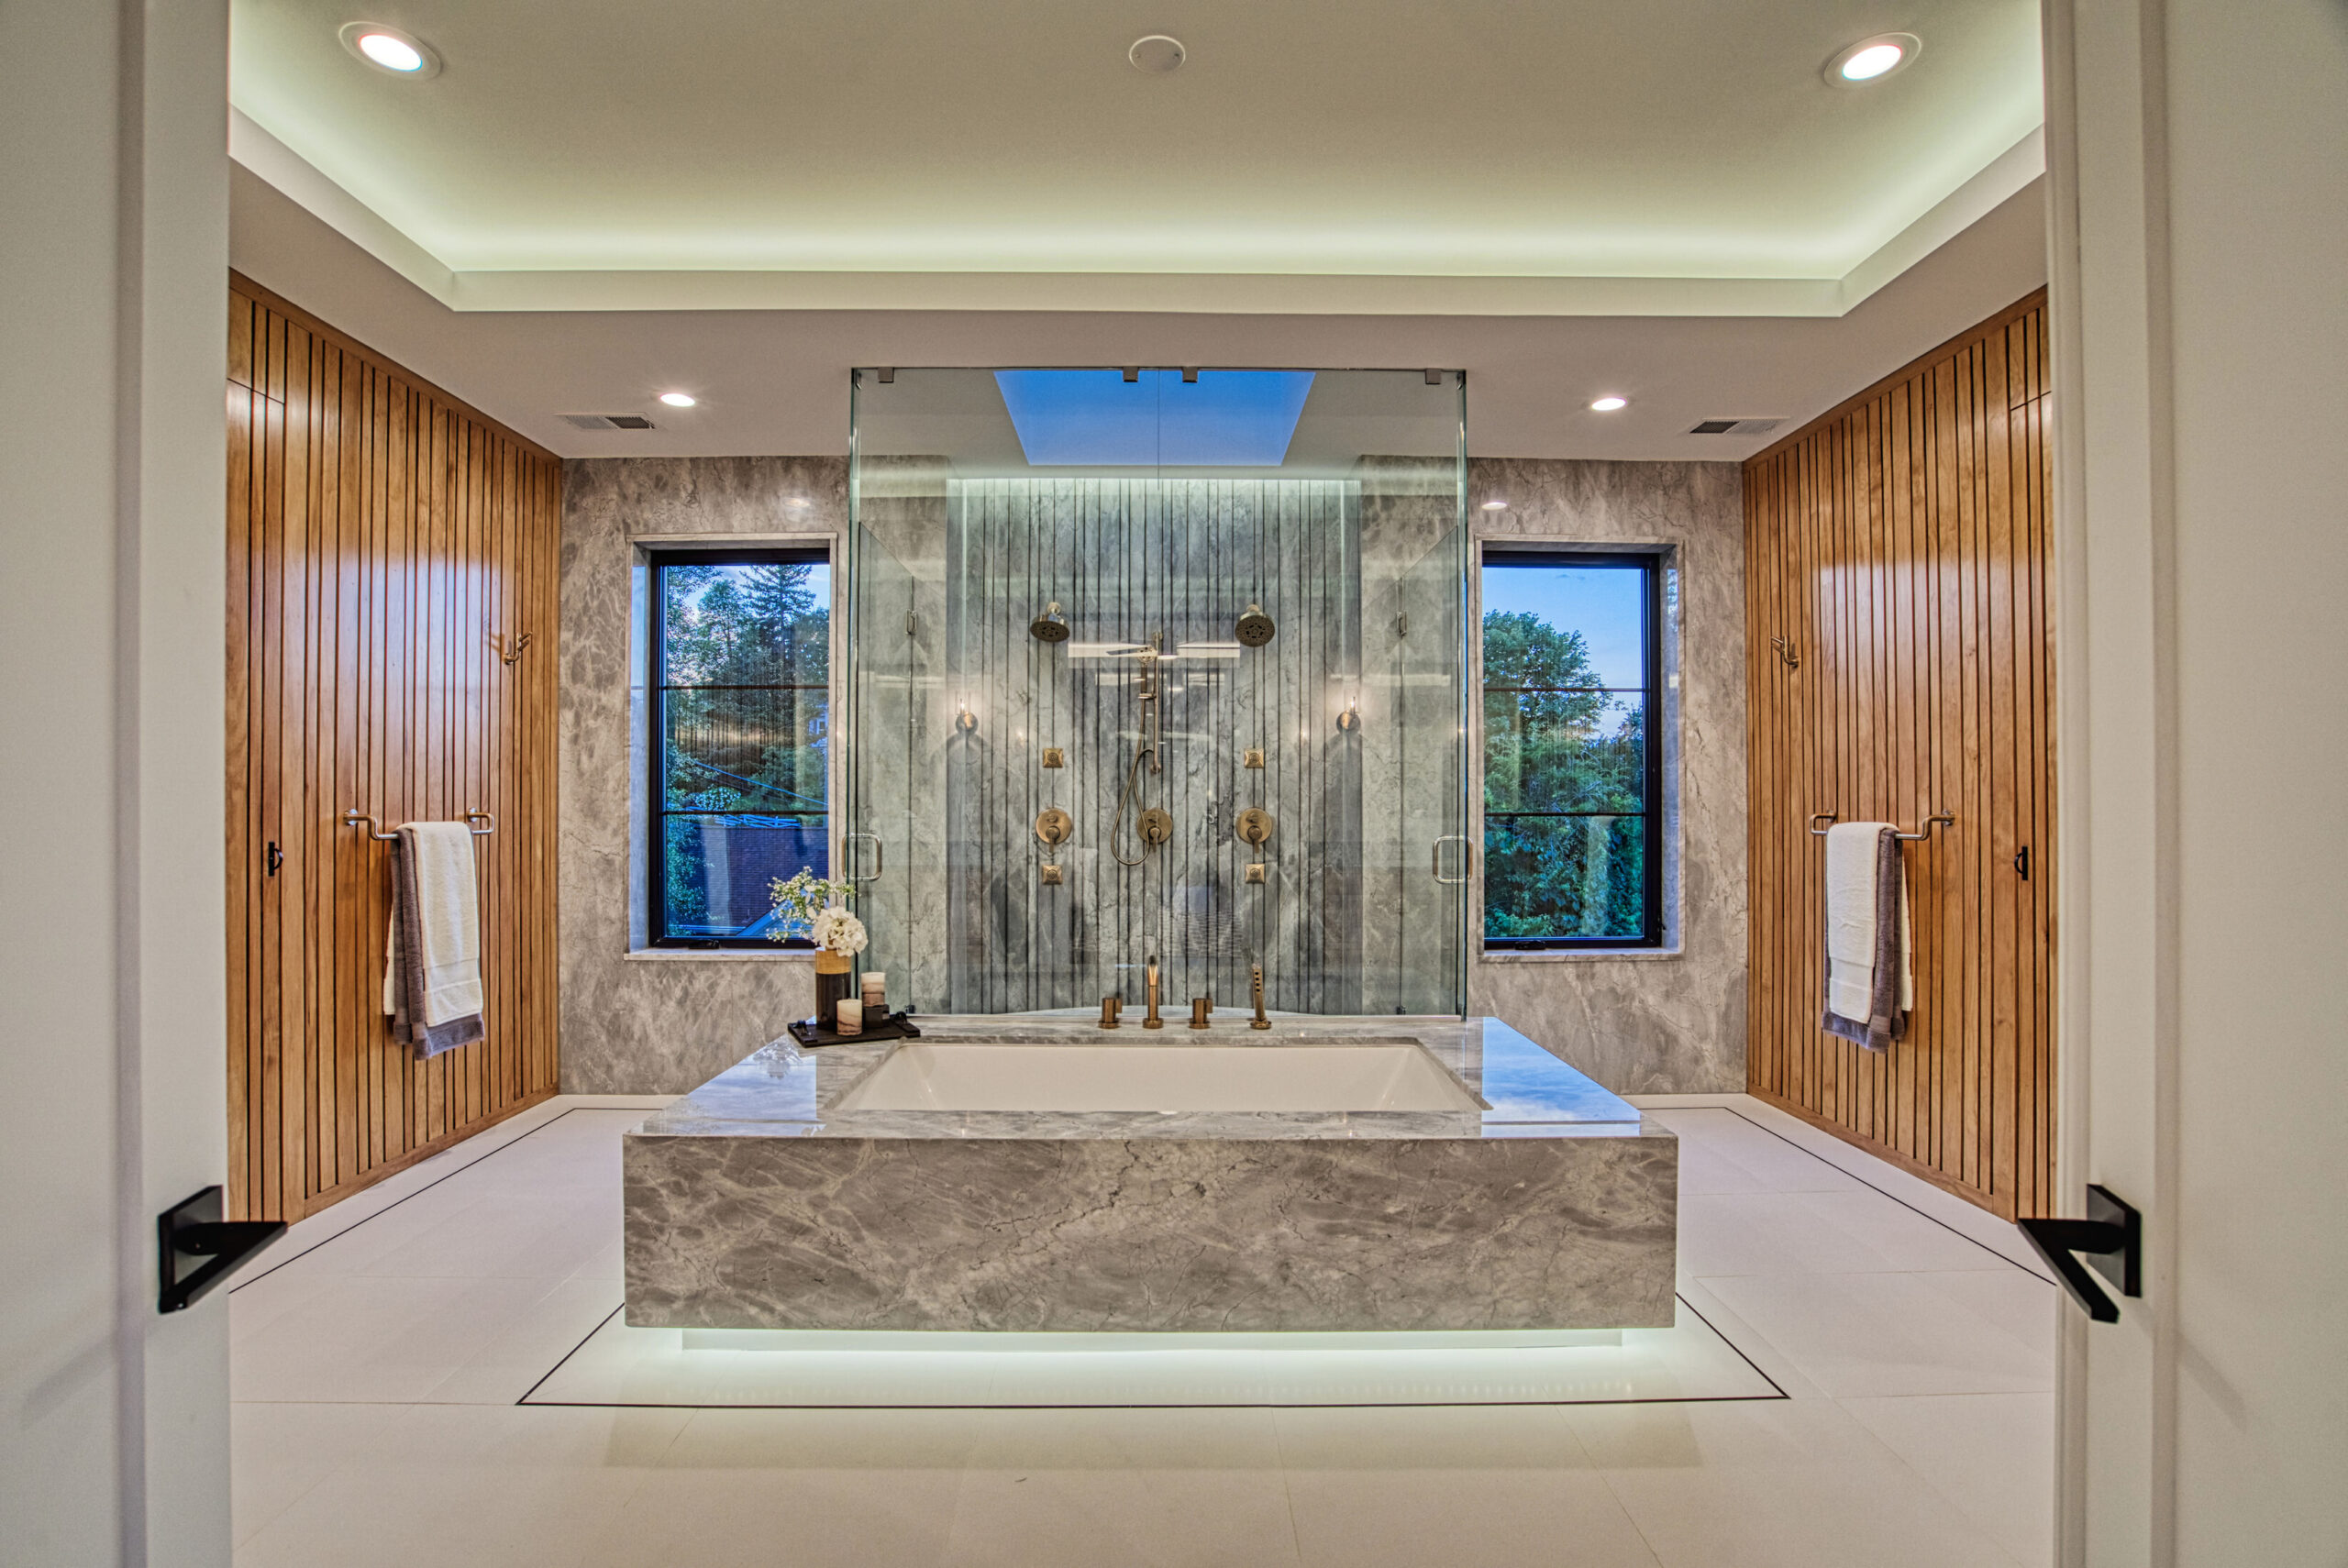 head on view of Bathroom in luxury new construction home with large marble jacuzzi tub and glass enclosed shower behind, wood paneled storage on either side. 